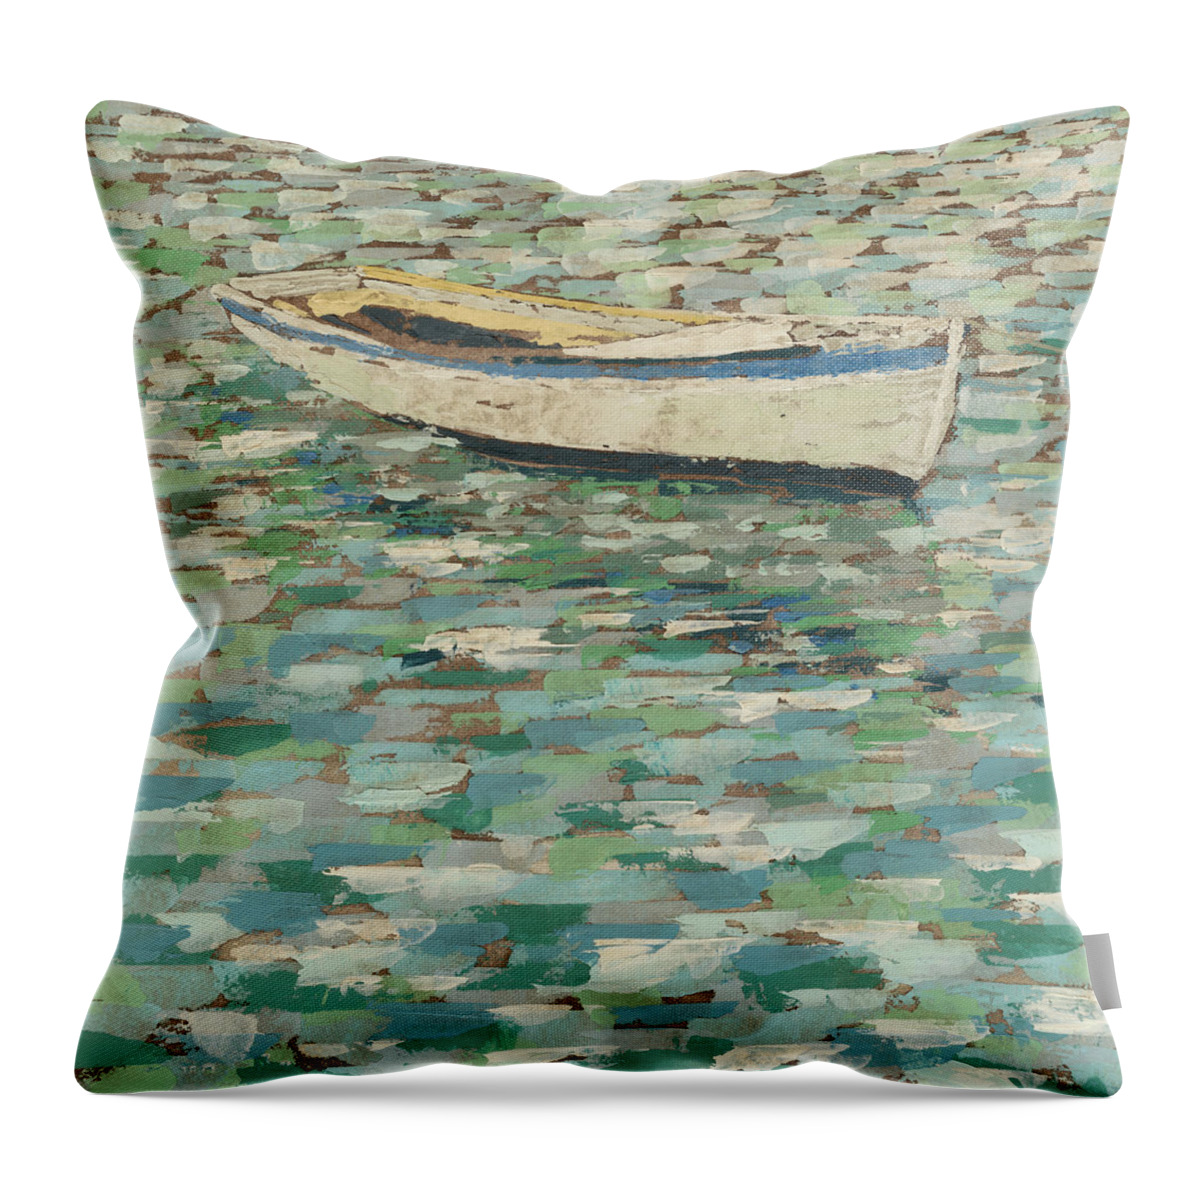 Transportation Throw Pillow featuring the painting On The Pond I #1 by Megan Meagher